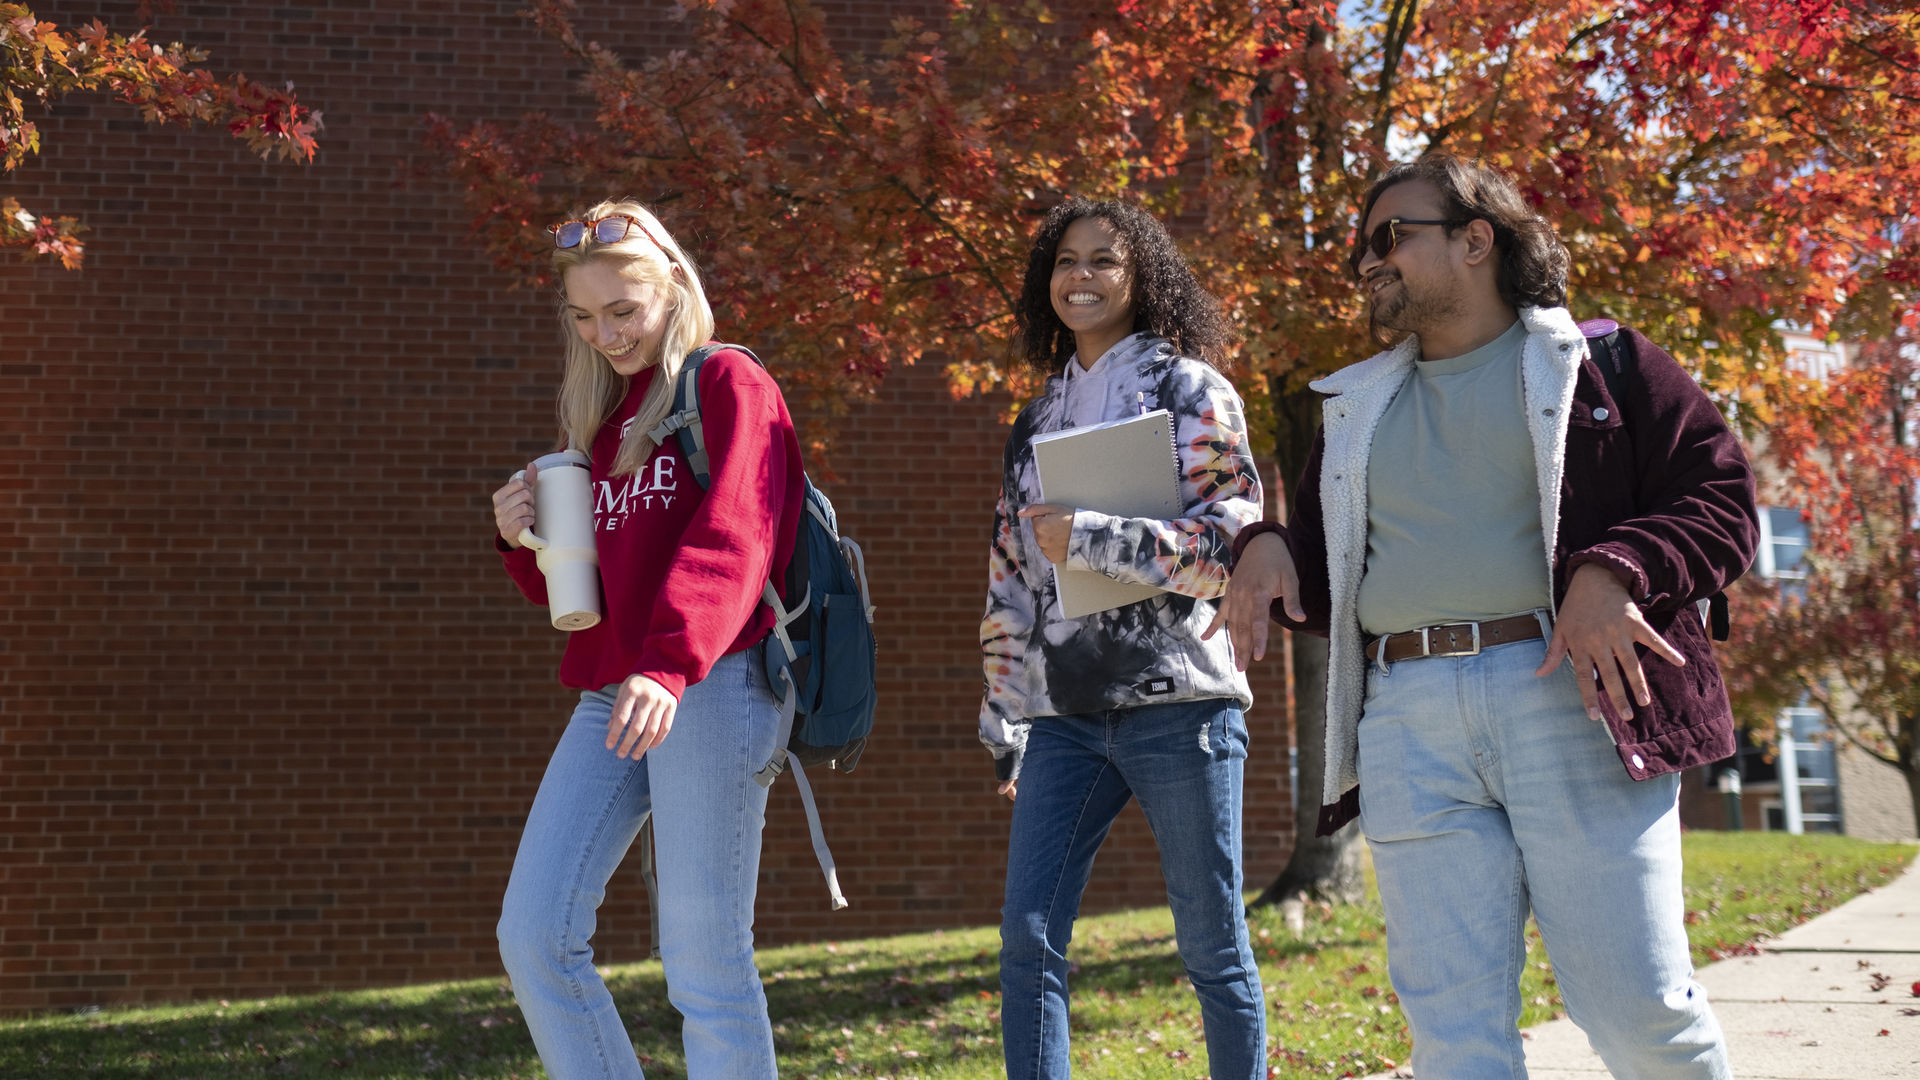 three students walking together on a fall day.